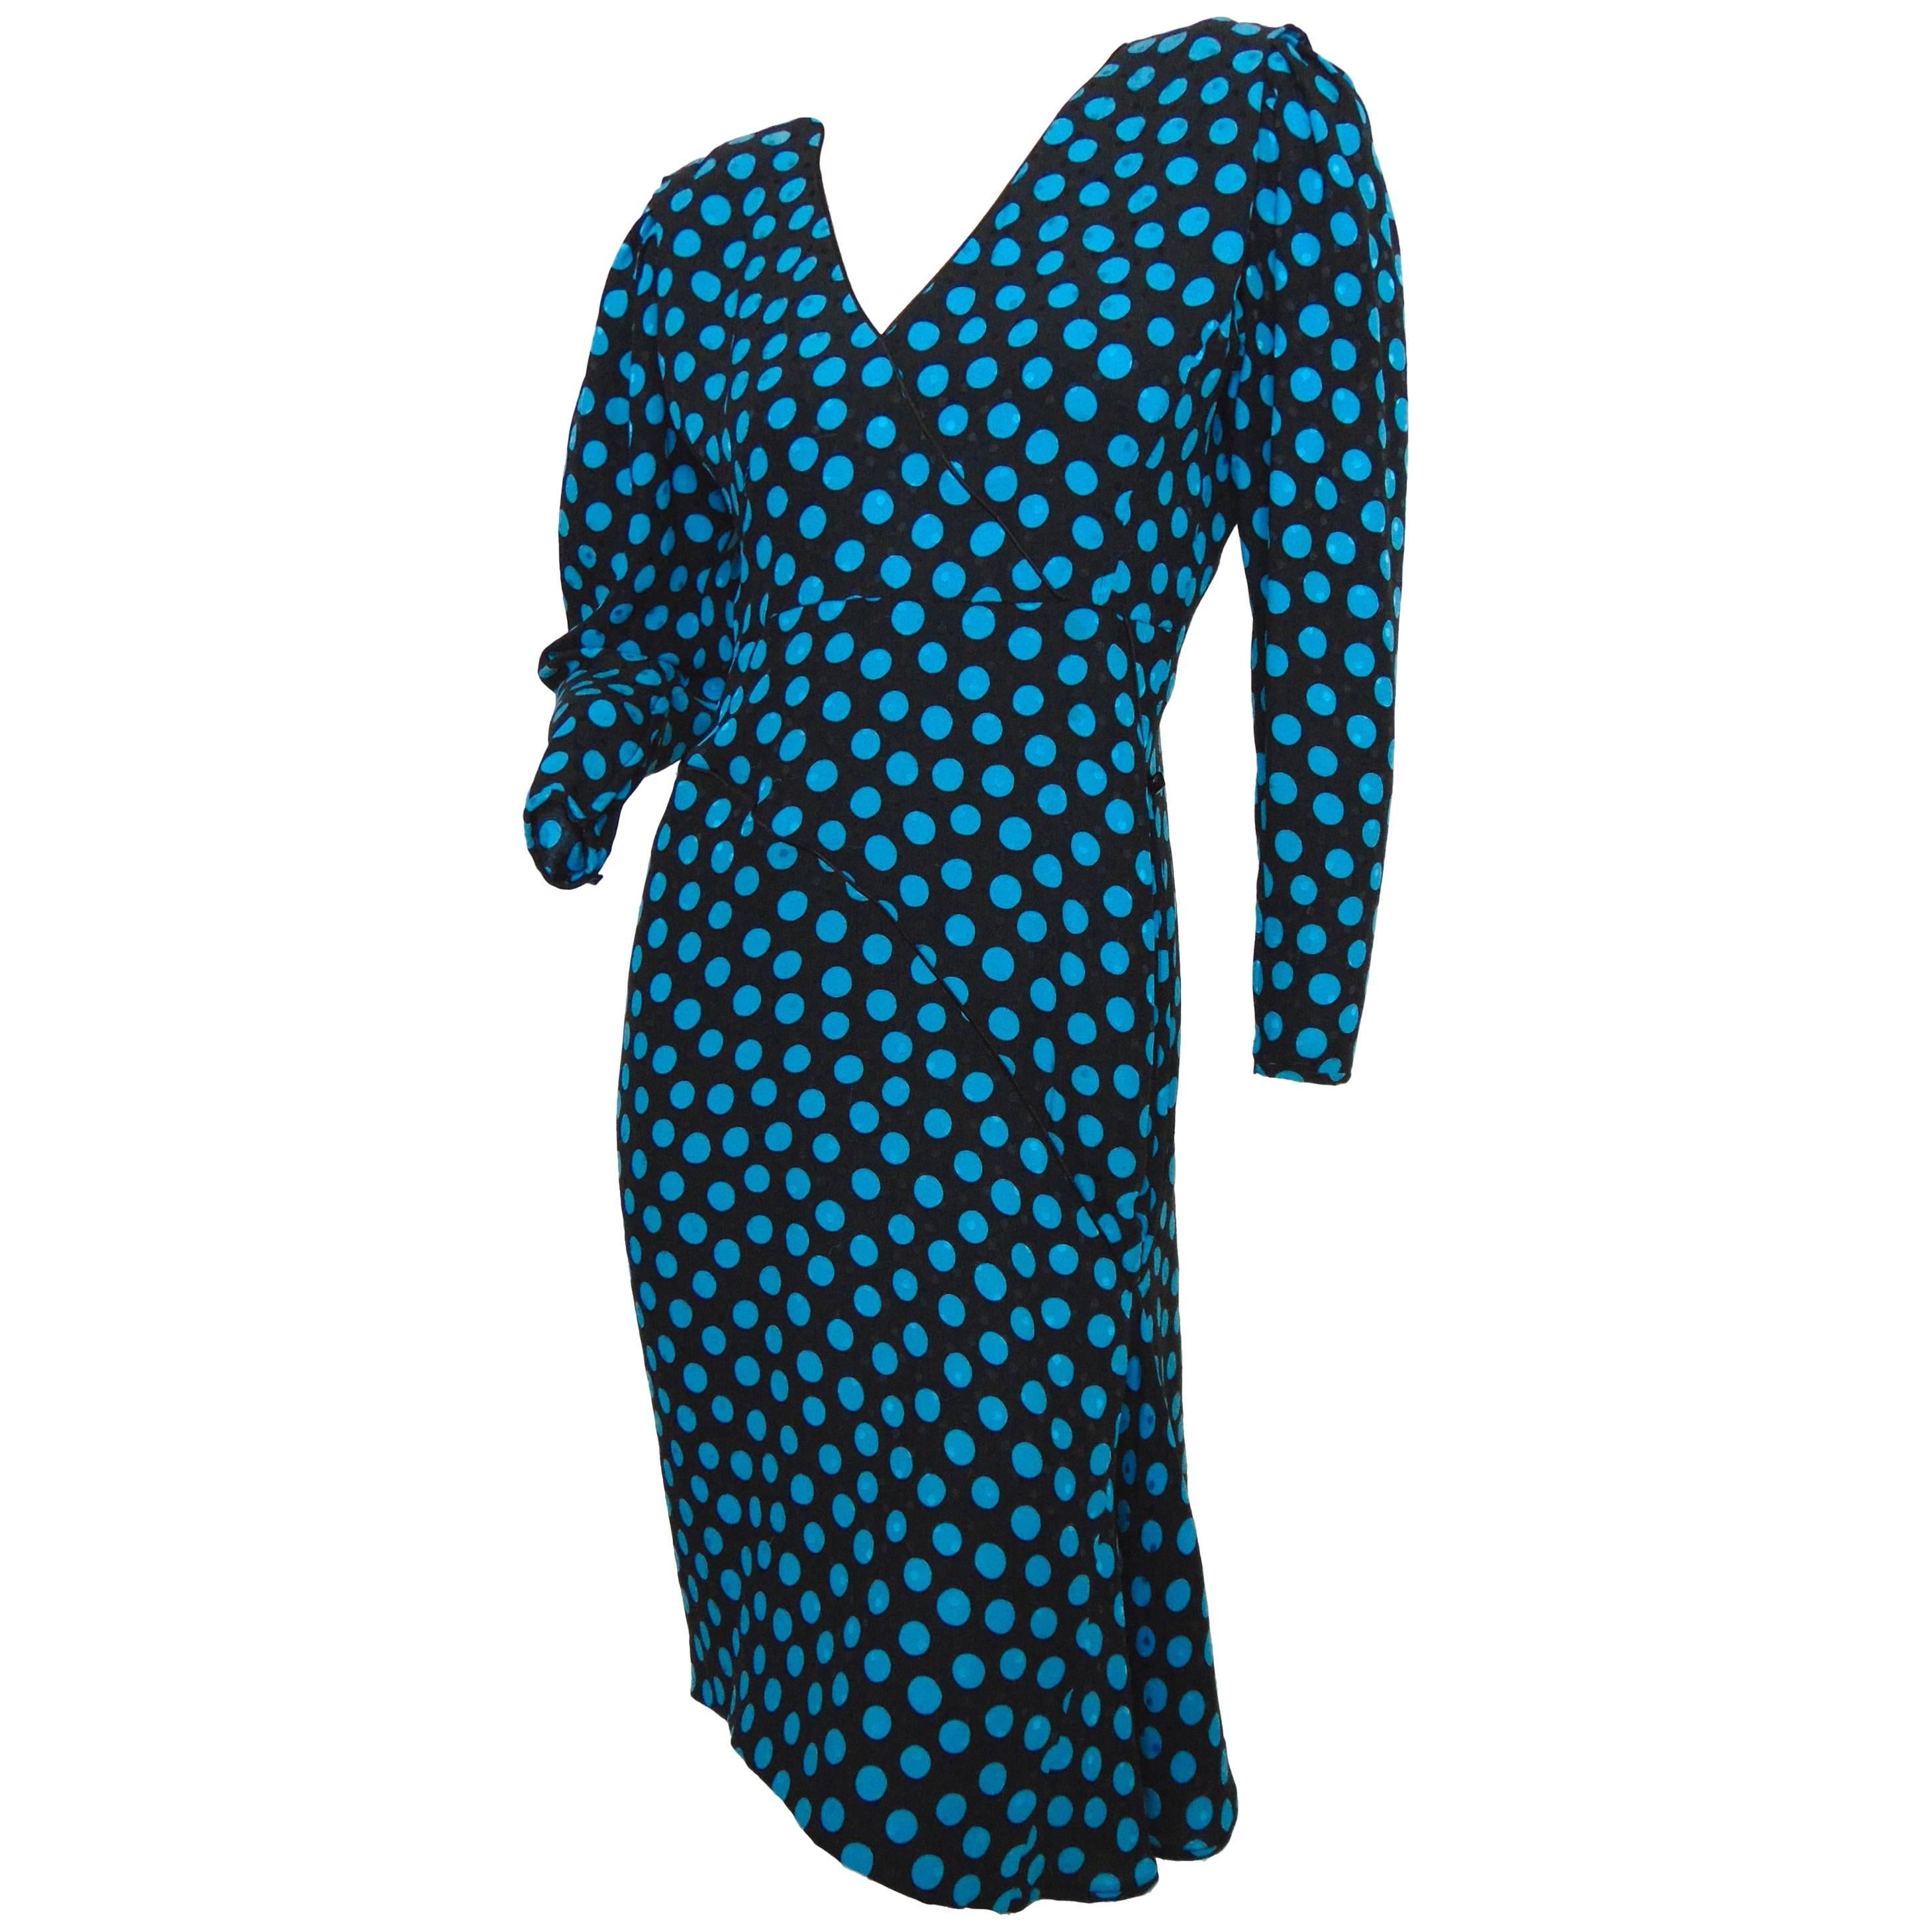 Emanuel Ungaro Parallele Silk Dress with Polka Dots 1980s Size S